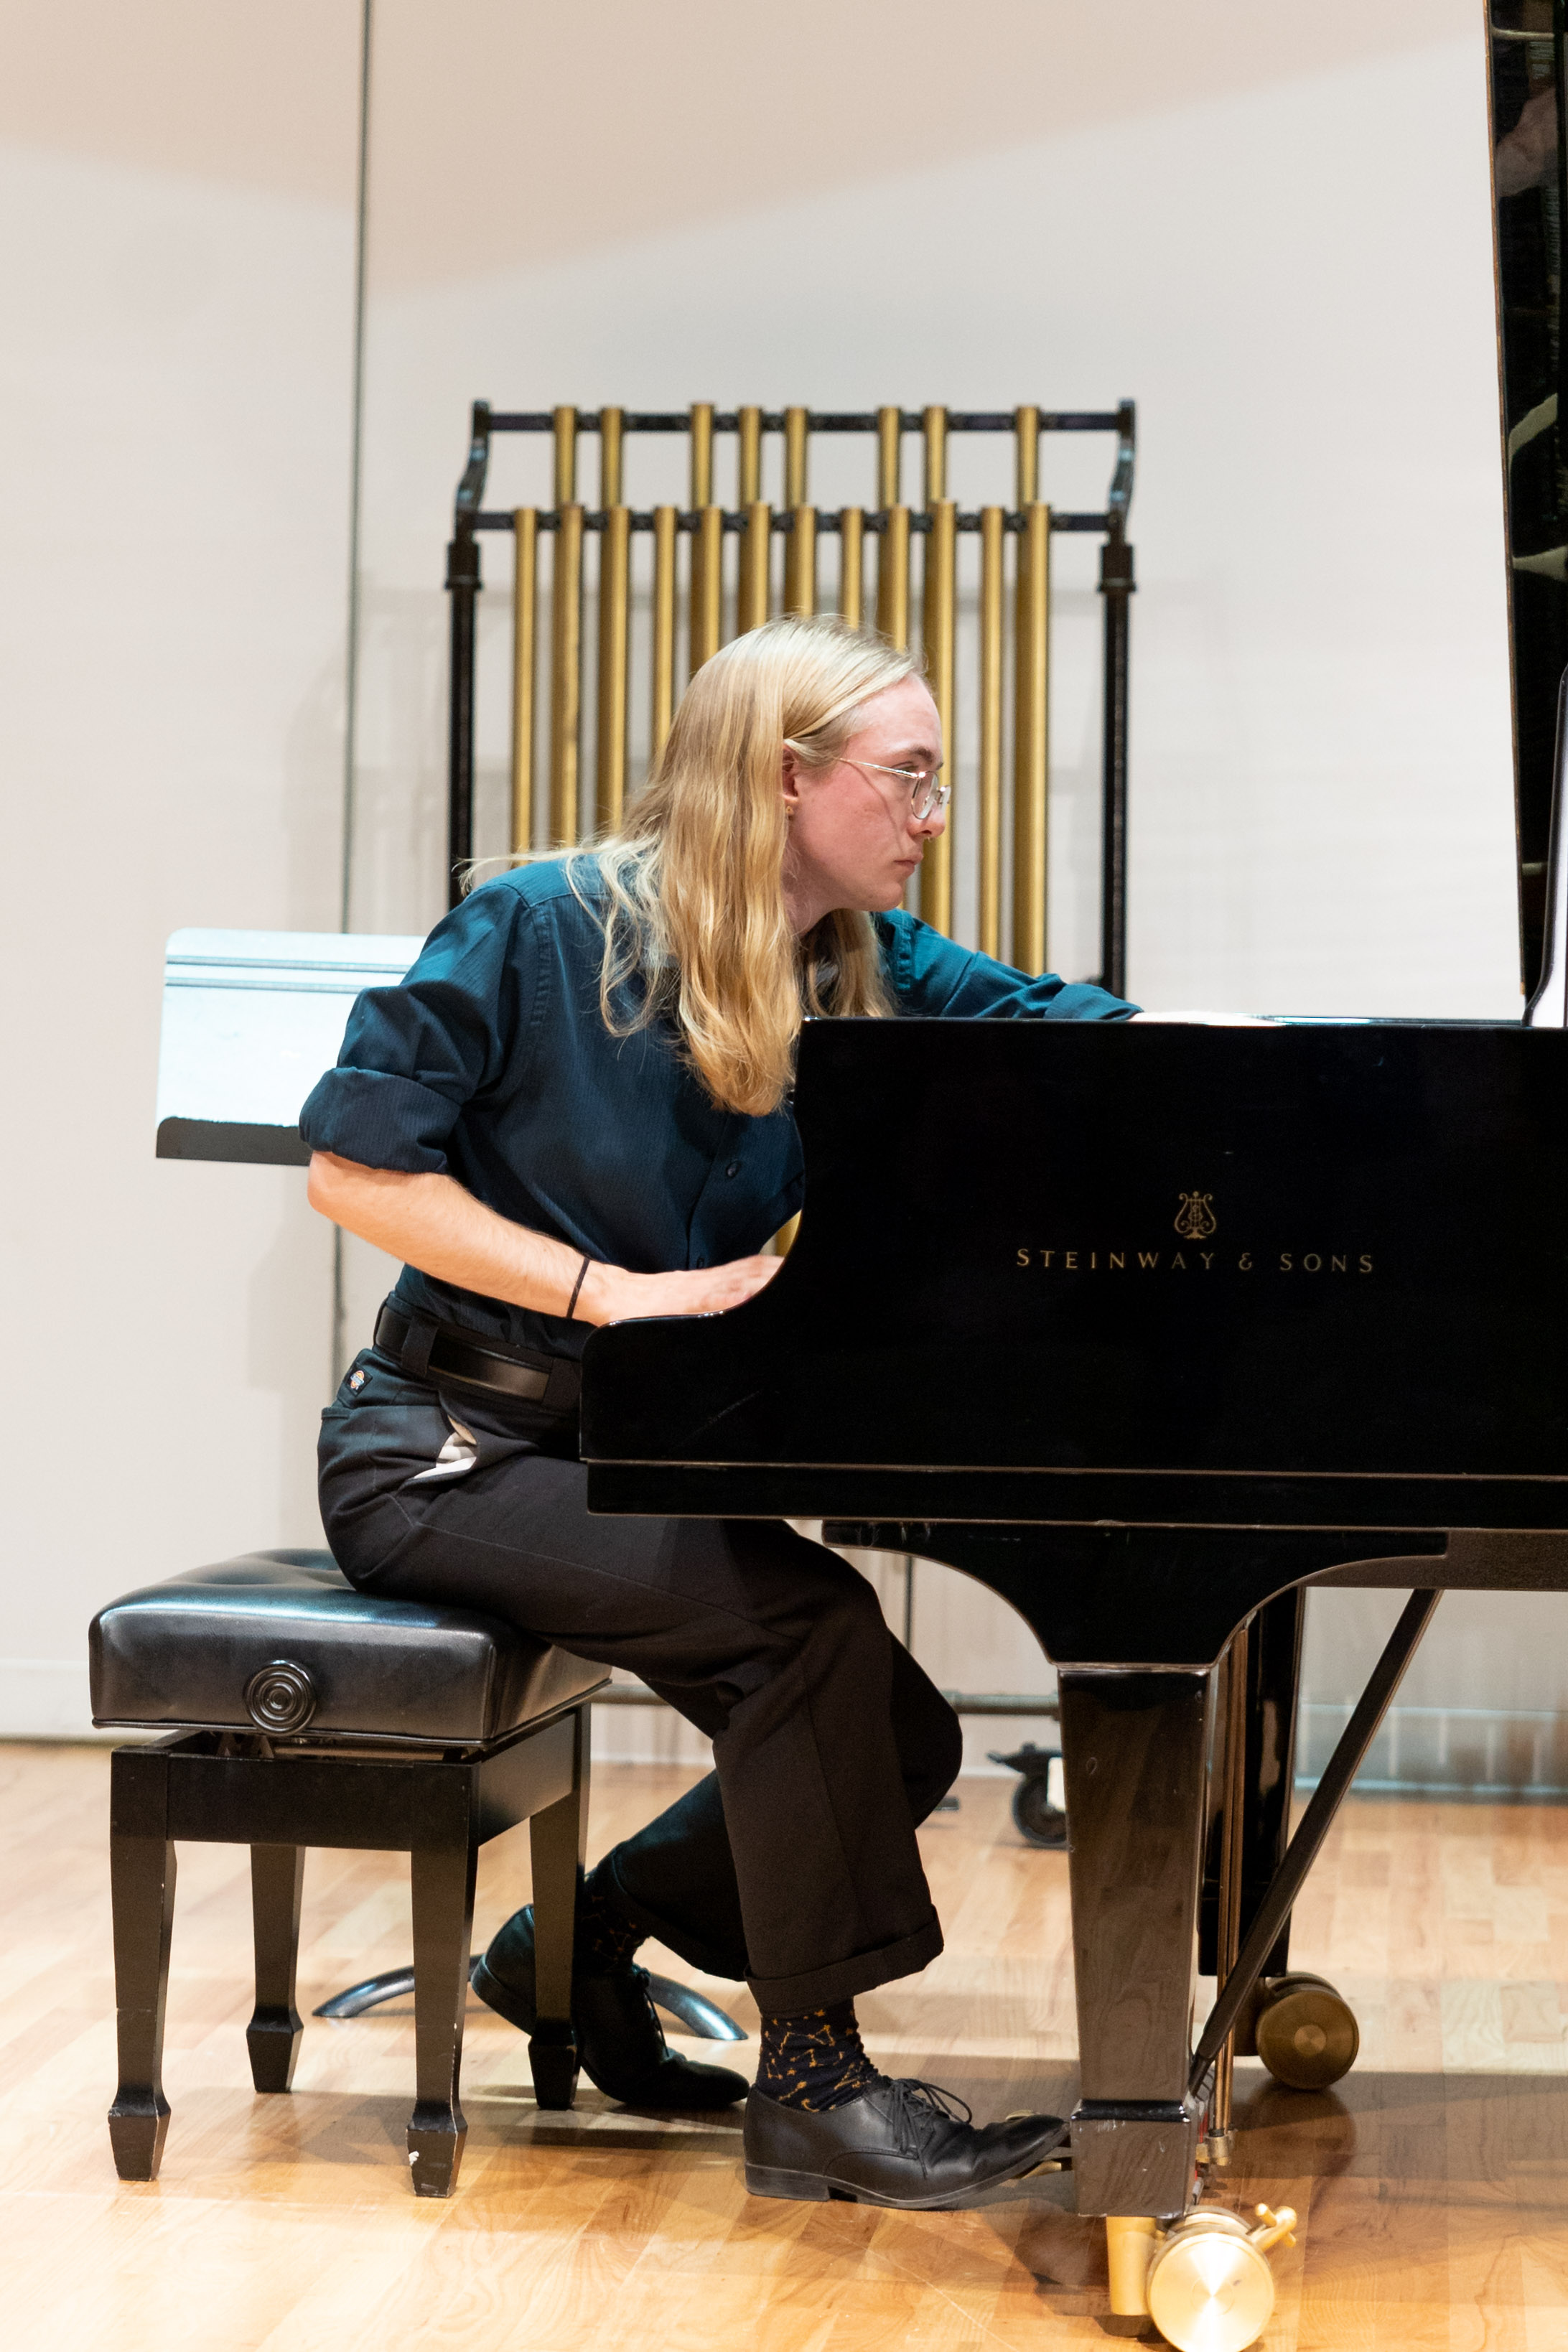 Emmett Tucker '24 performs selections from George Crumb's Makrokosmos, Volume I during "The Crumb Legacy" event on Thursday, Oct. 13, in Packard Hall. Photo by Chidera Ikpeamarom '22